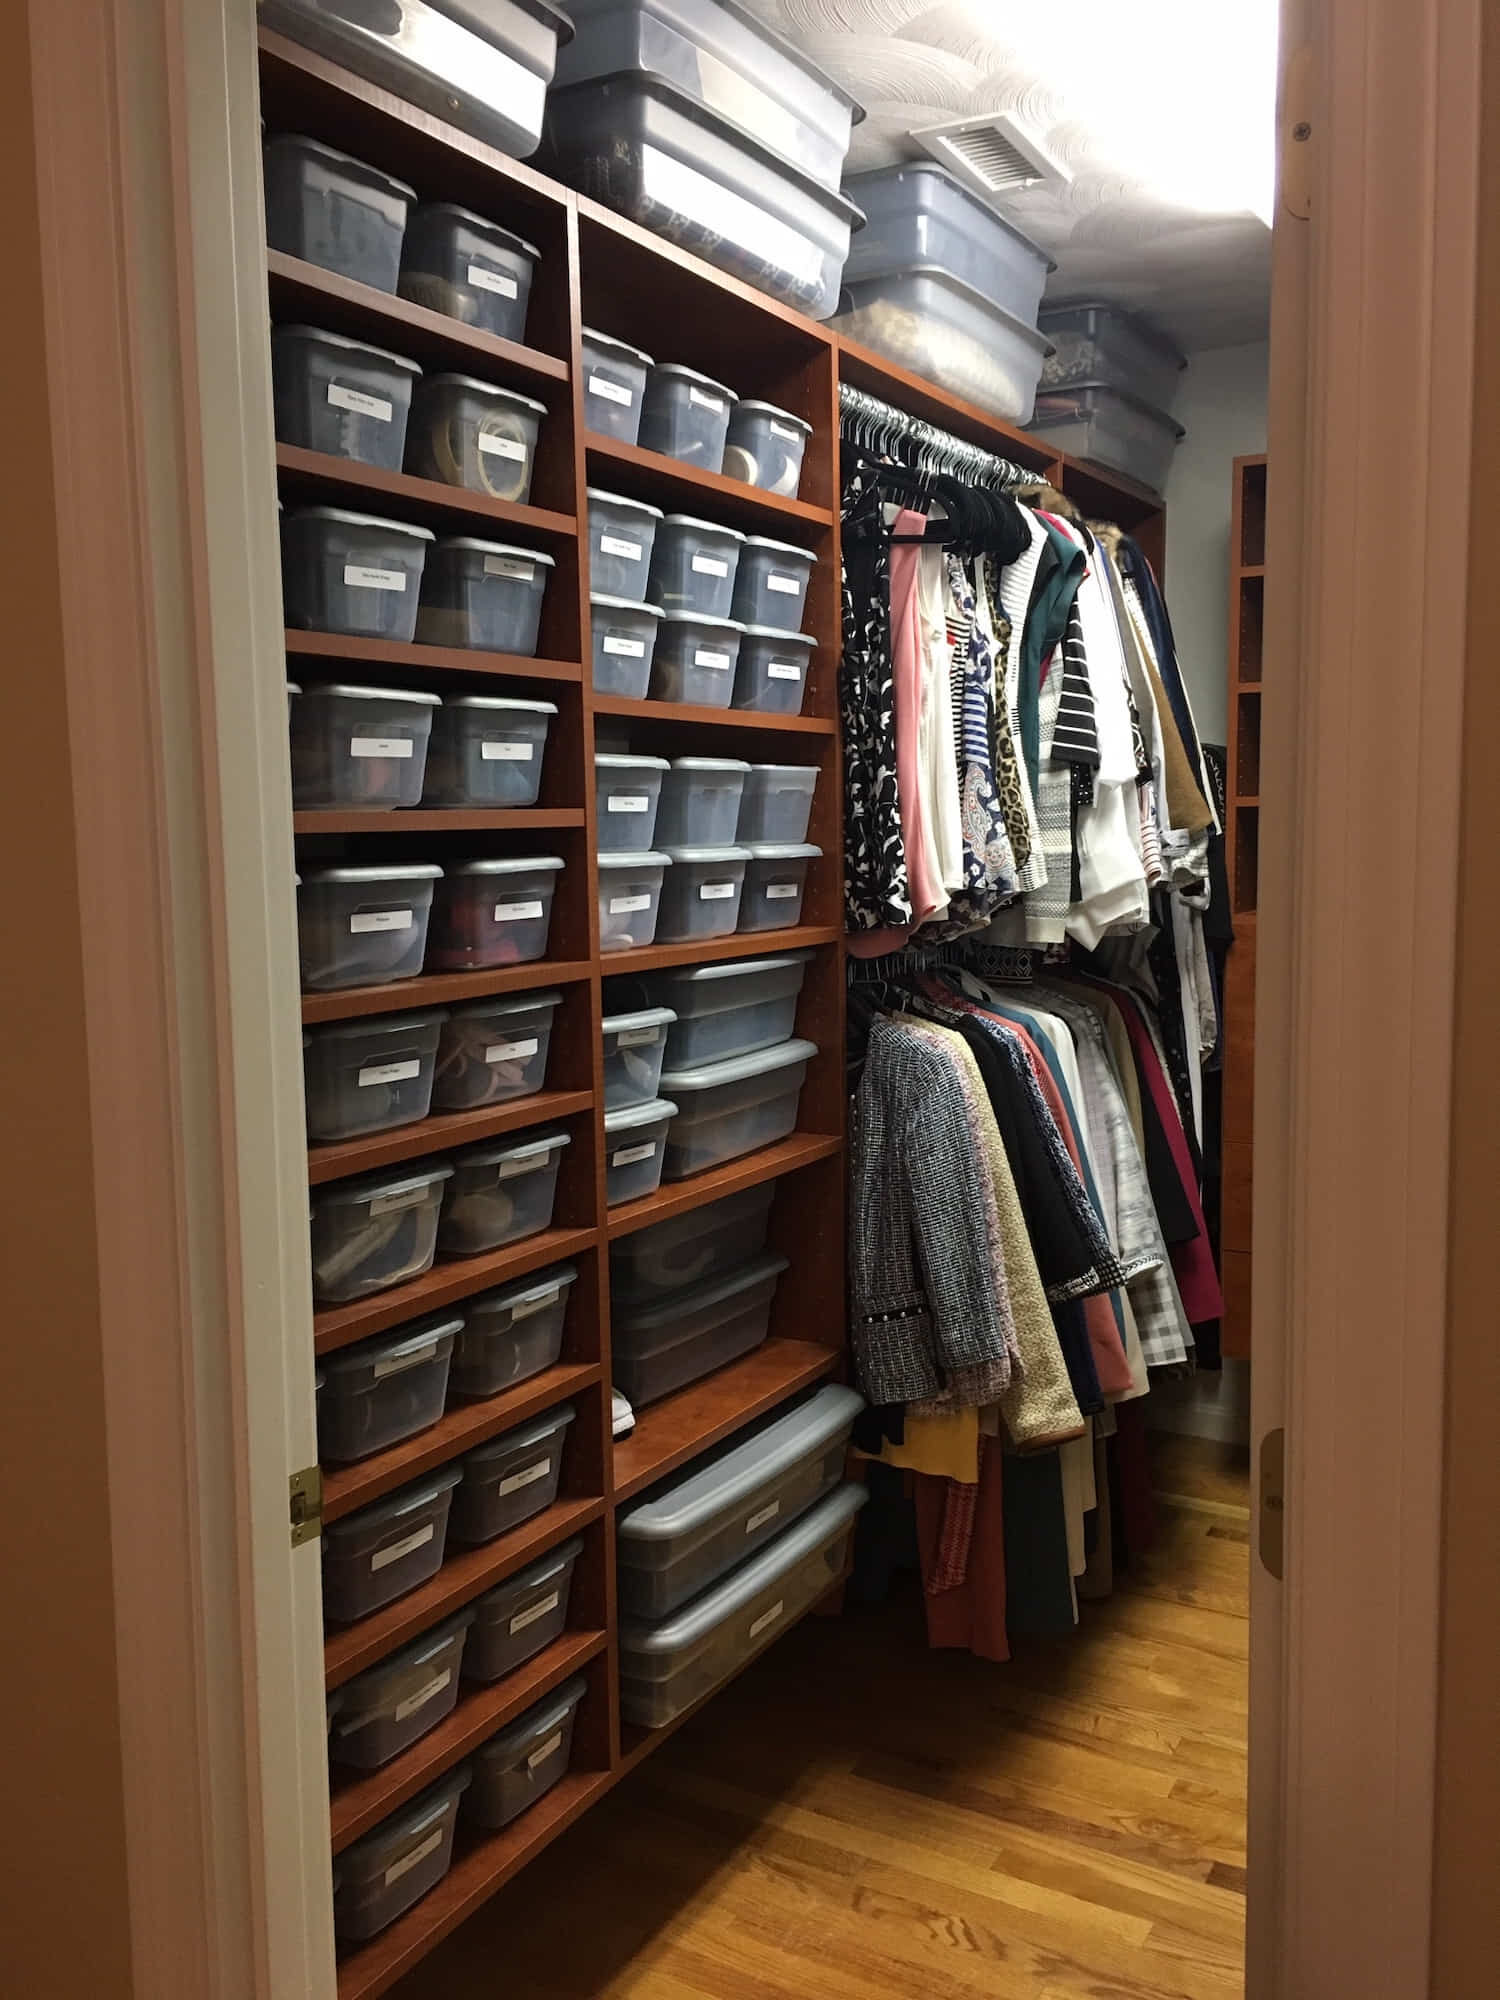 Walk-in Closet:  After